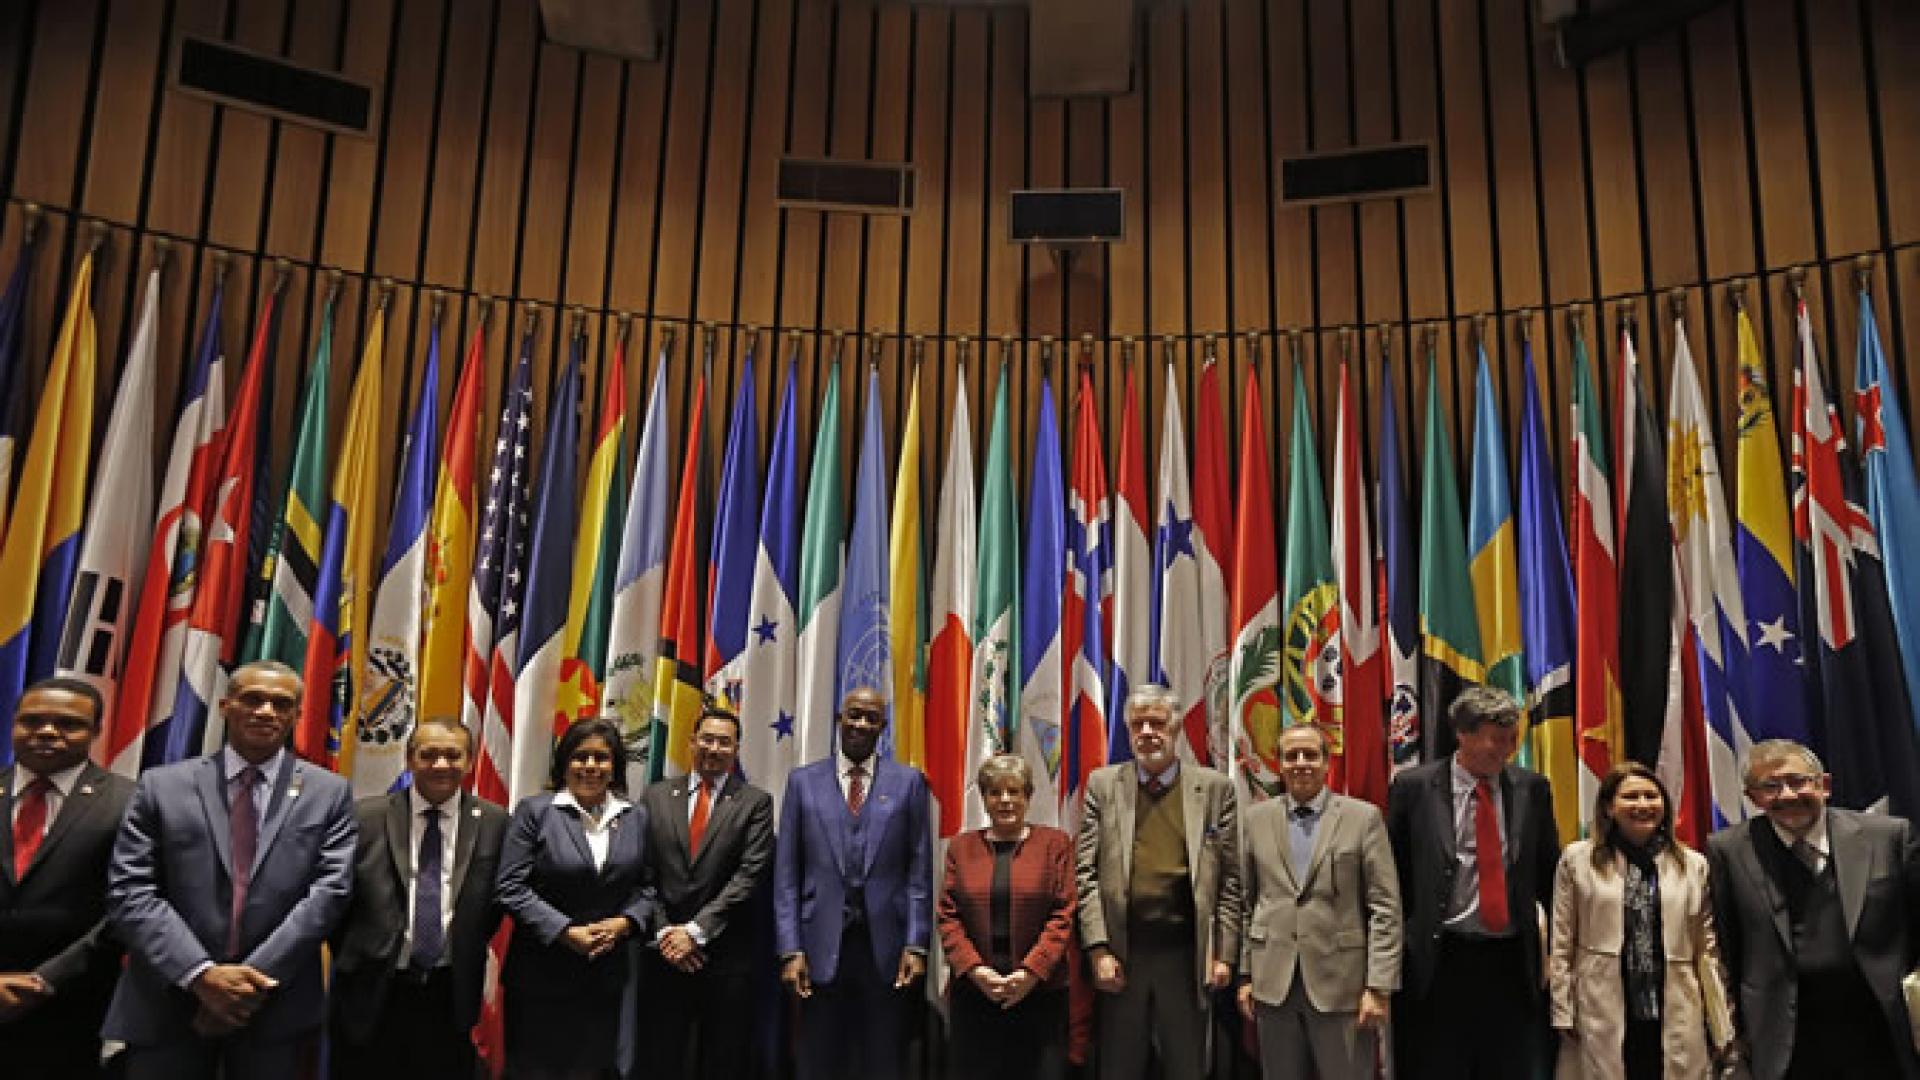 The delegation accompanying Trinidad and Tobago's Prime Minister, Keith Rowley, met with ECLAC Executive Secretary, Alicia Bárcena, and several directors of the organization.